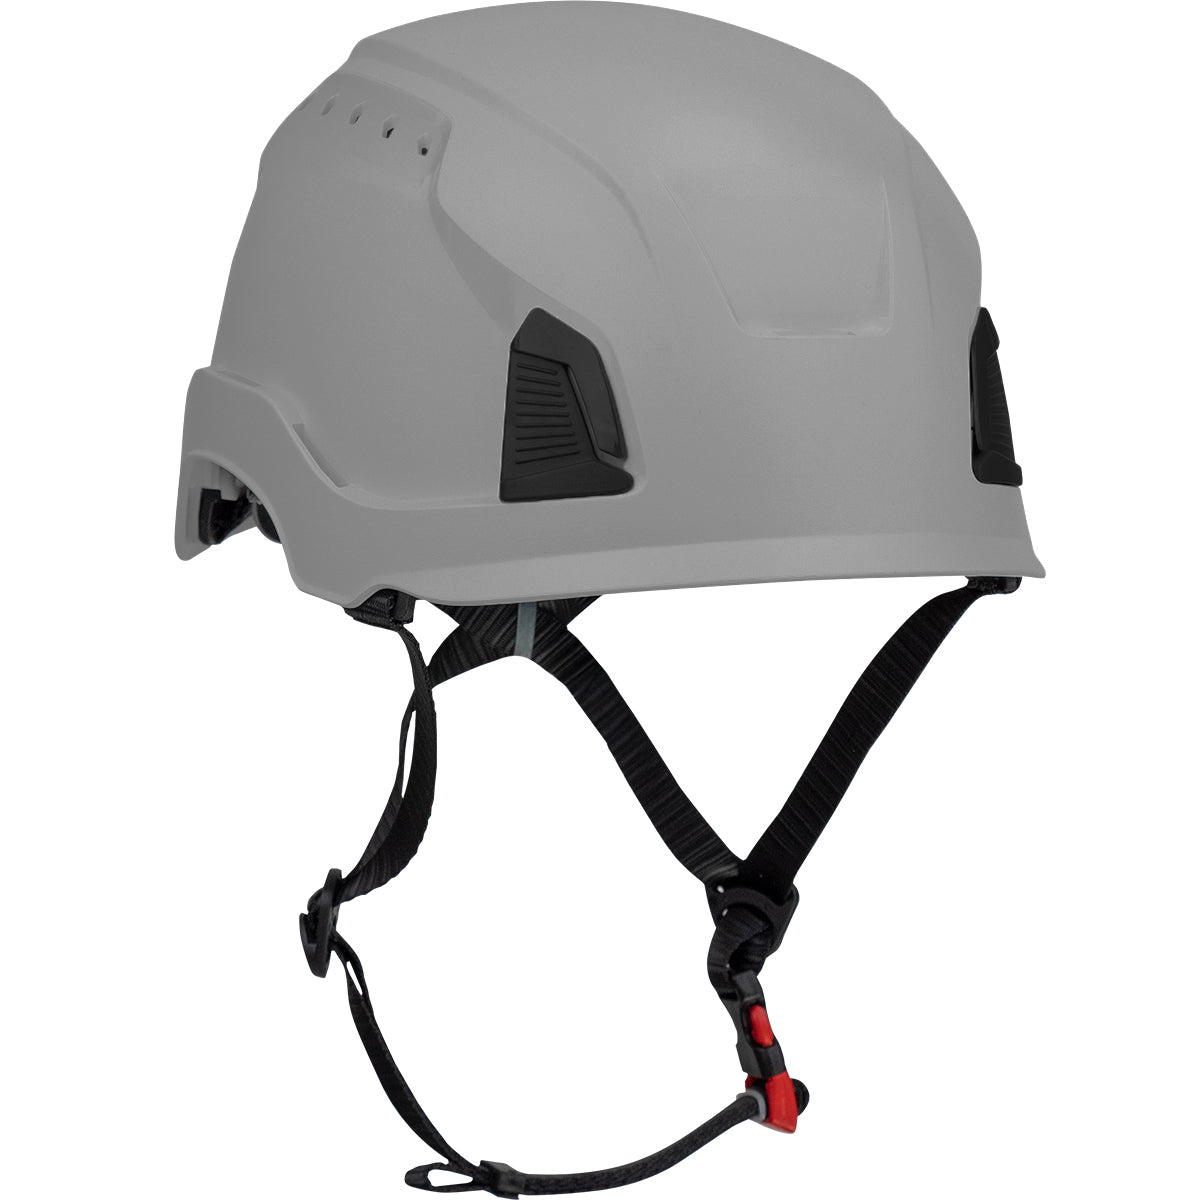 Traverse™ Vented, Industrial Climbing Helmet with Mips® Technology, ABS Shell, EPS Foam Impact Liner, HDPE Suspension, Wheel Ratchet Adjustment and 4-Point Chin Strap